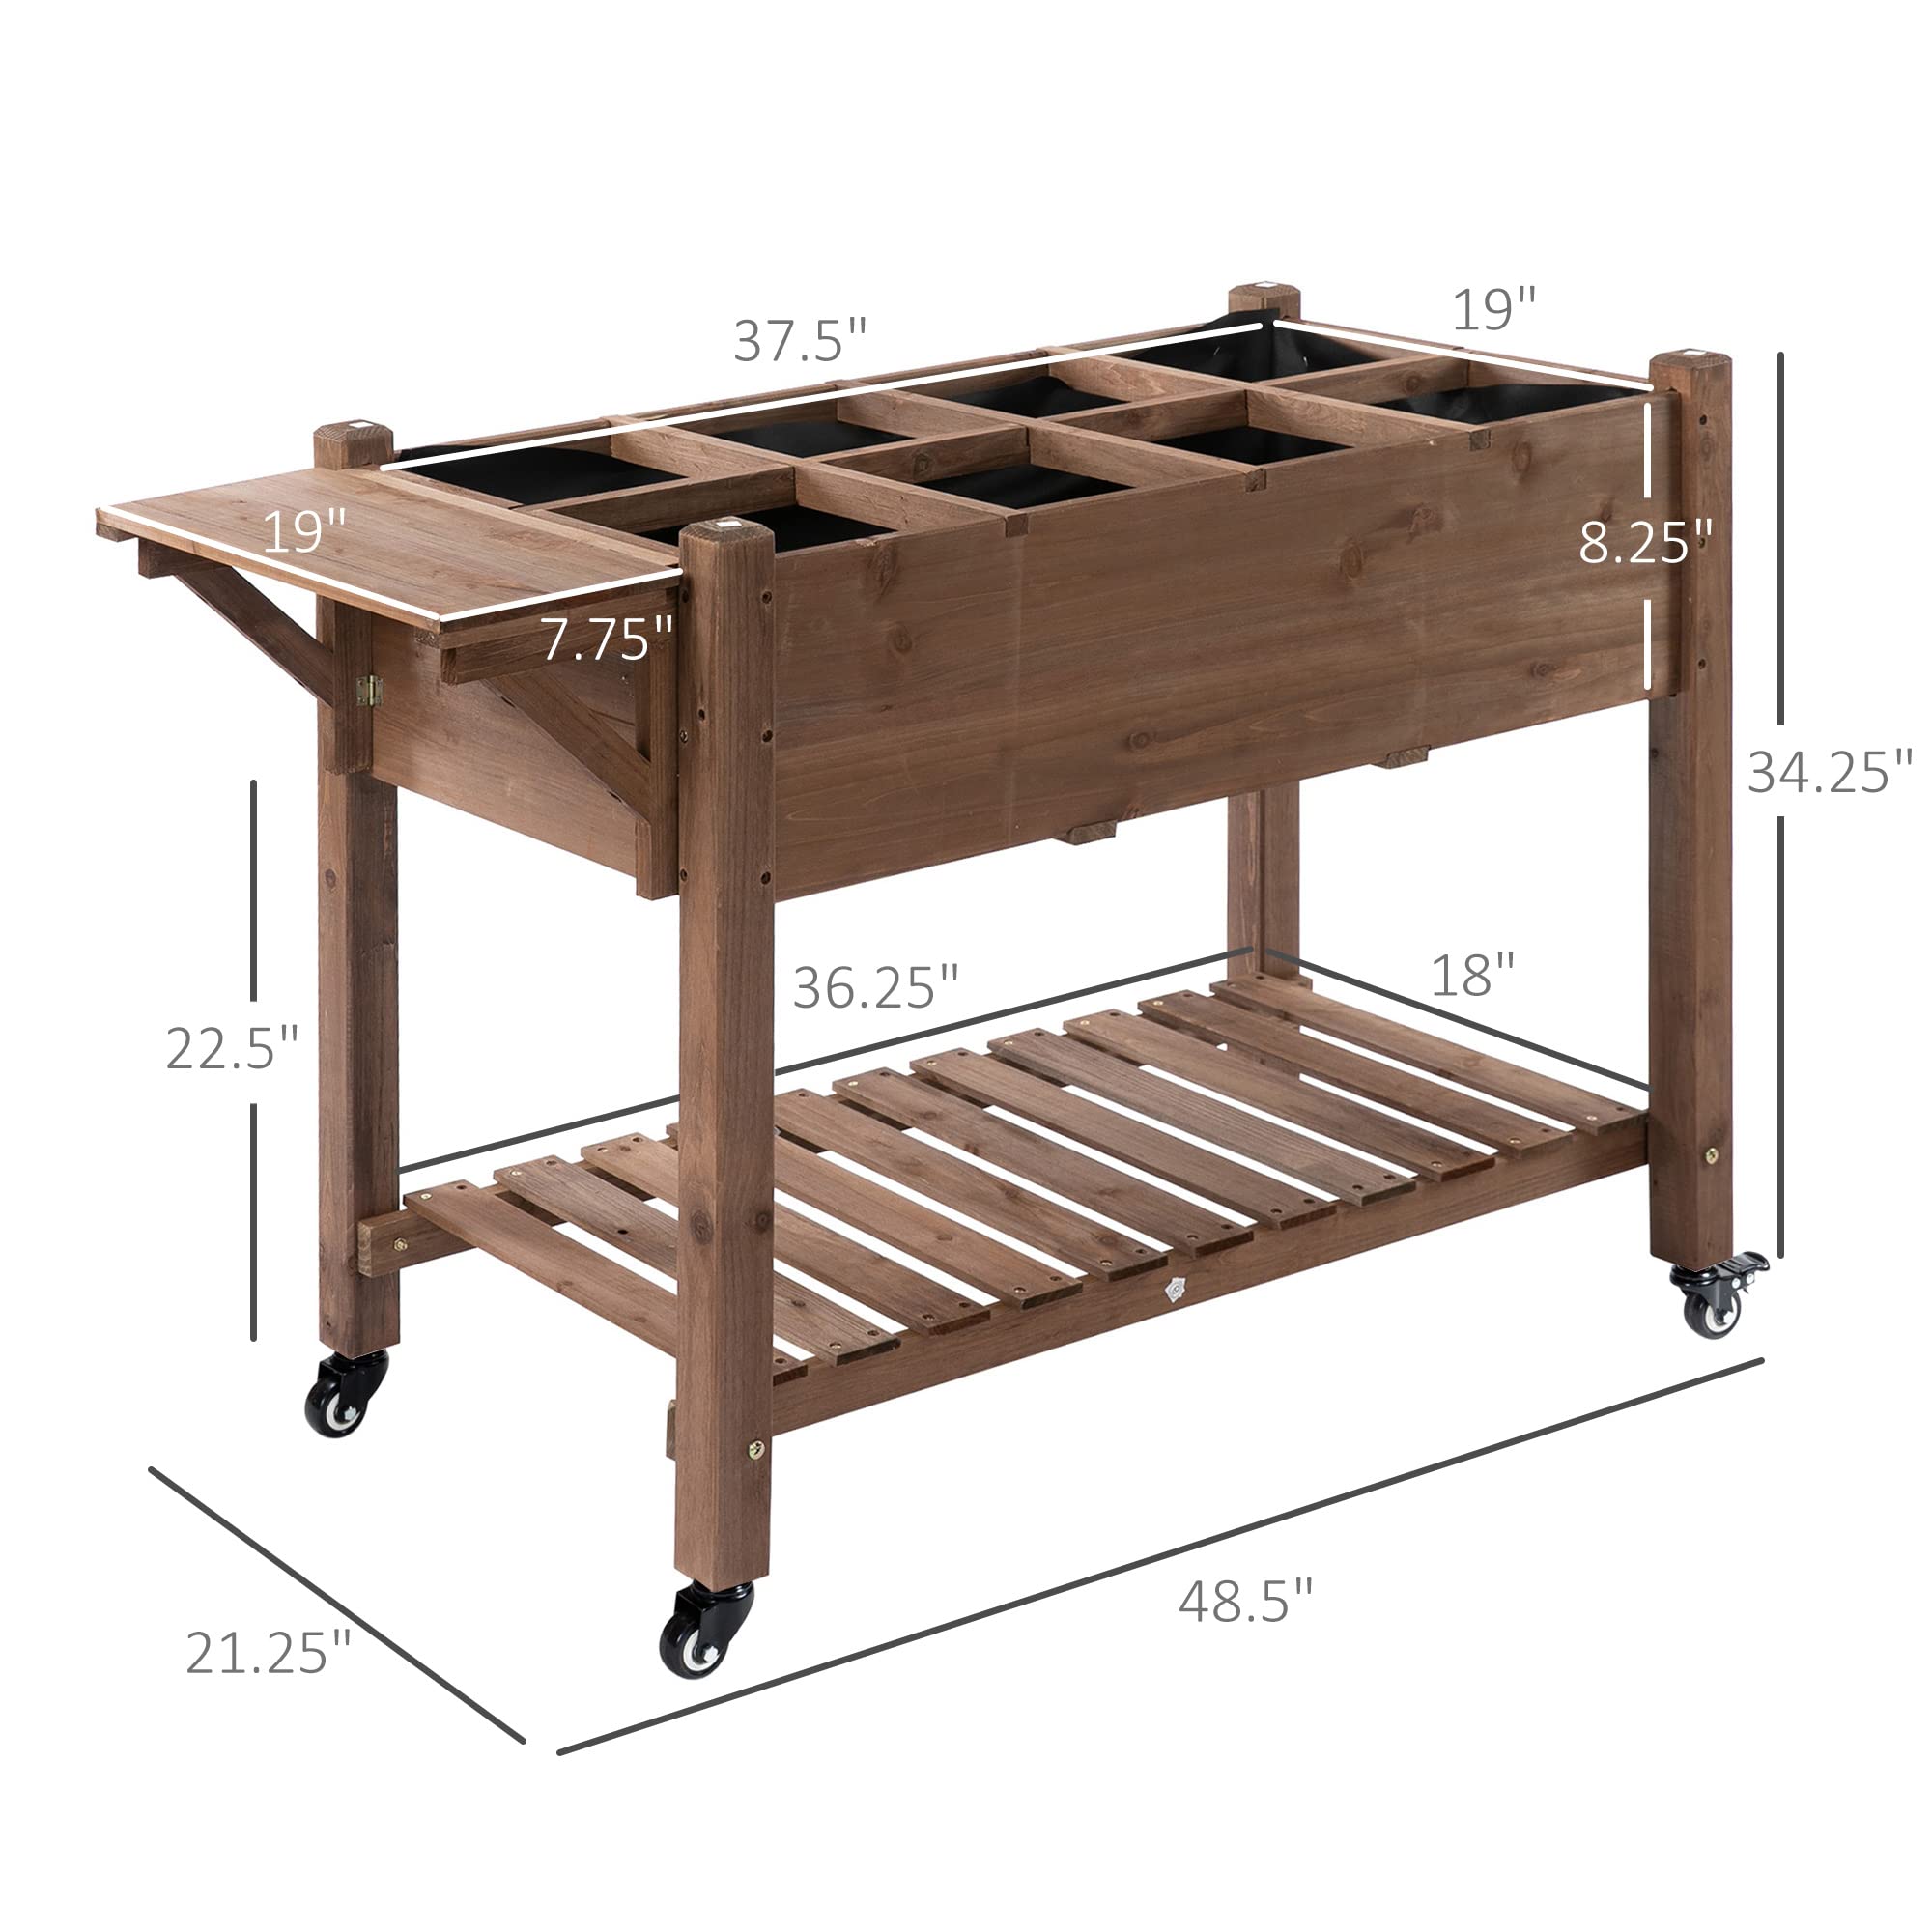 Outsunny Raised Garden Bed with 8 Grow Grids, Wooden Outdoor Plant Box Stand with Folding Side Table and Wheels, 49